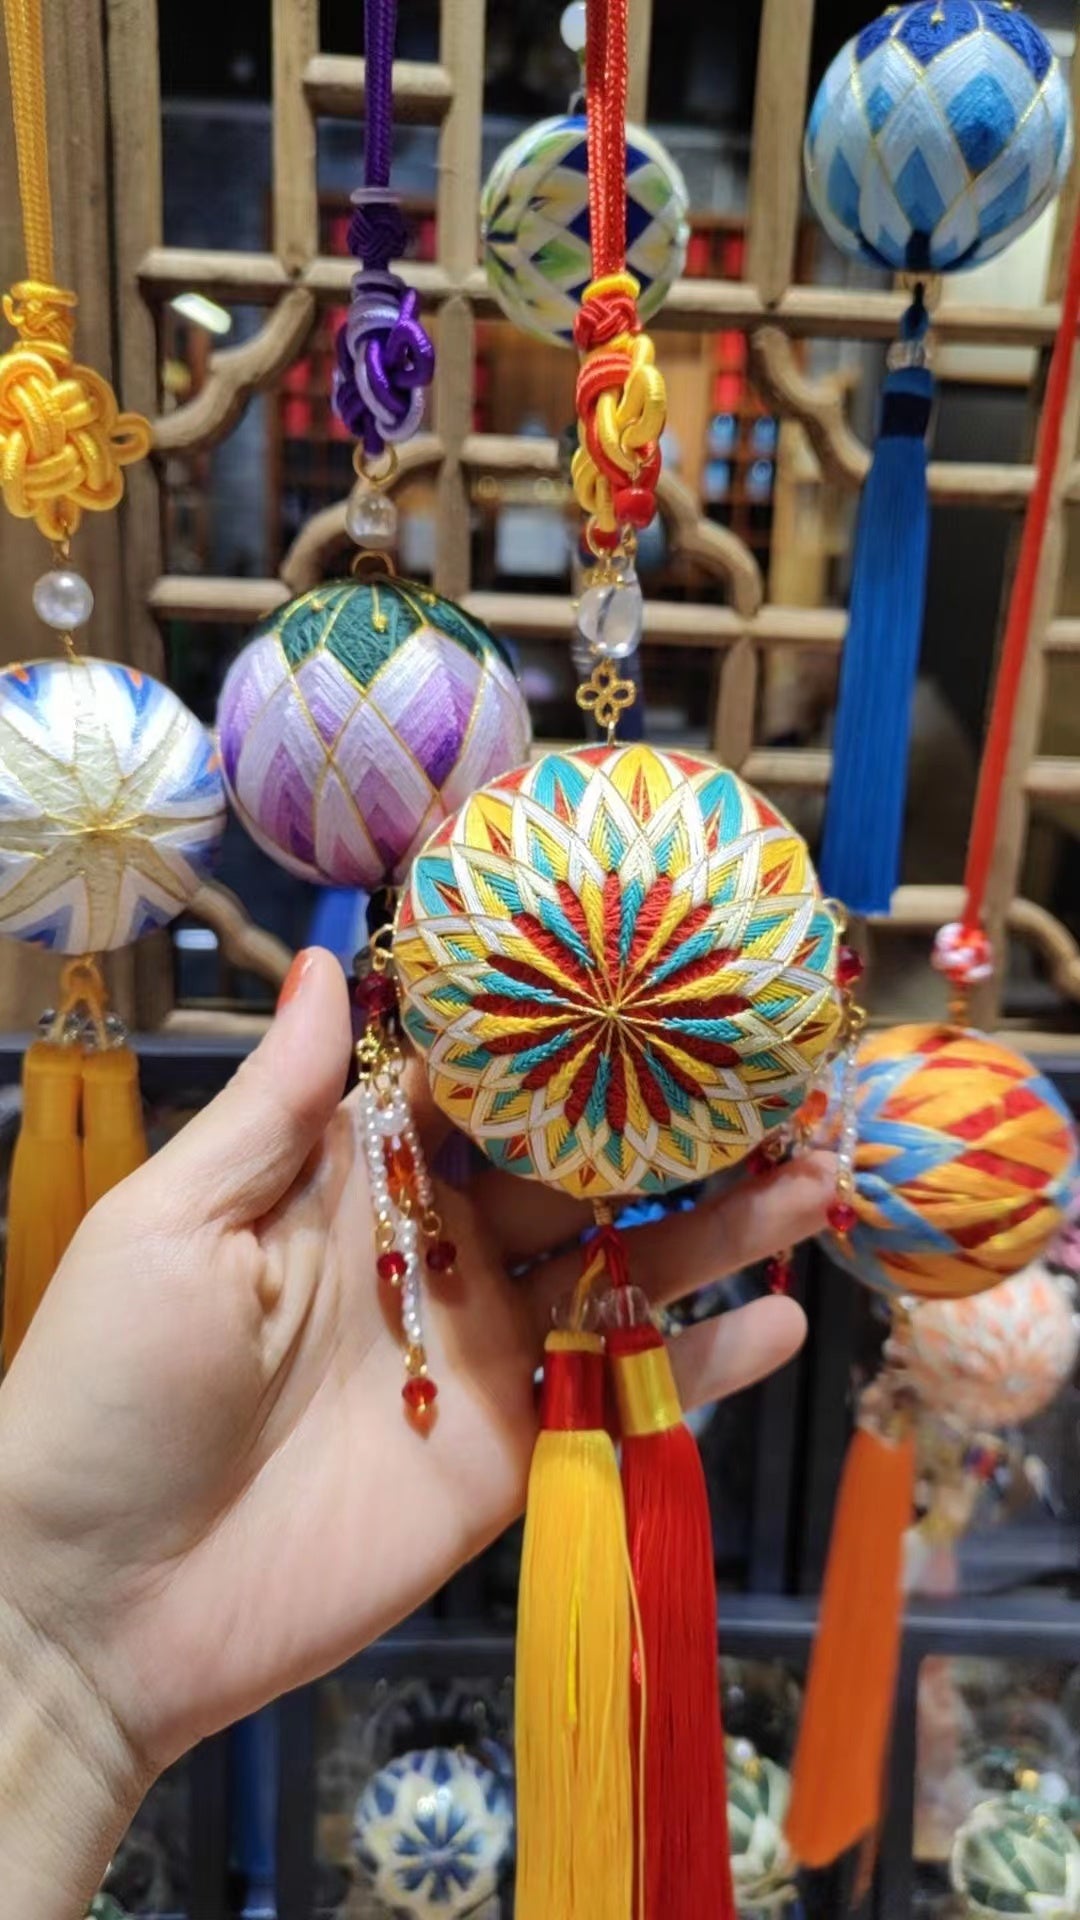 Embroidered Ball Ornaments